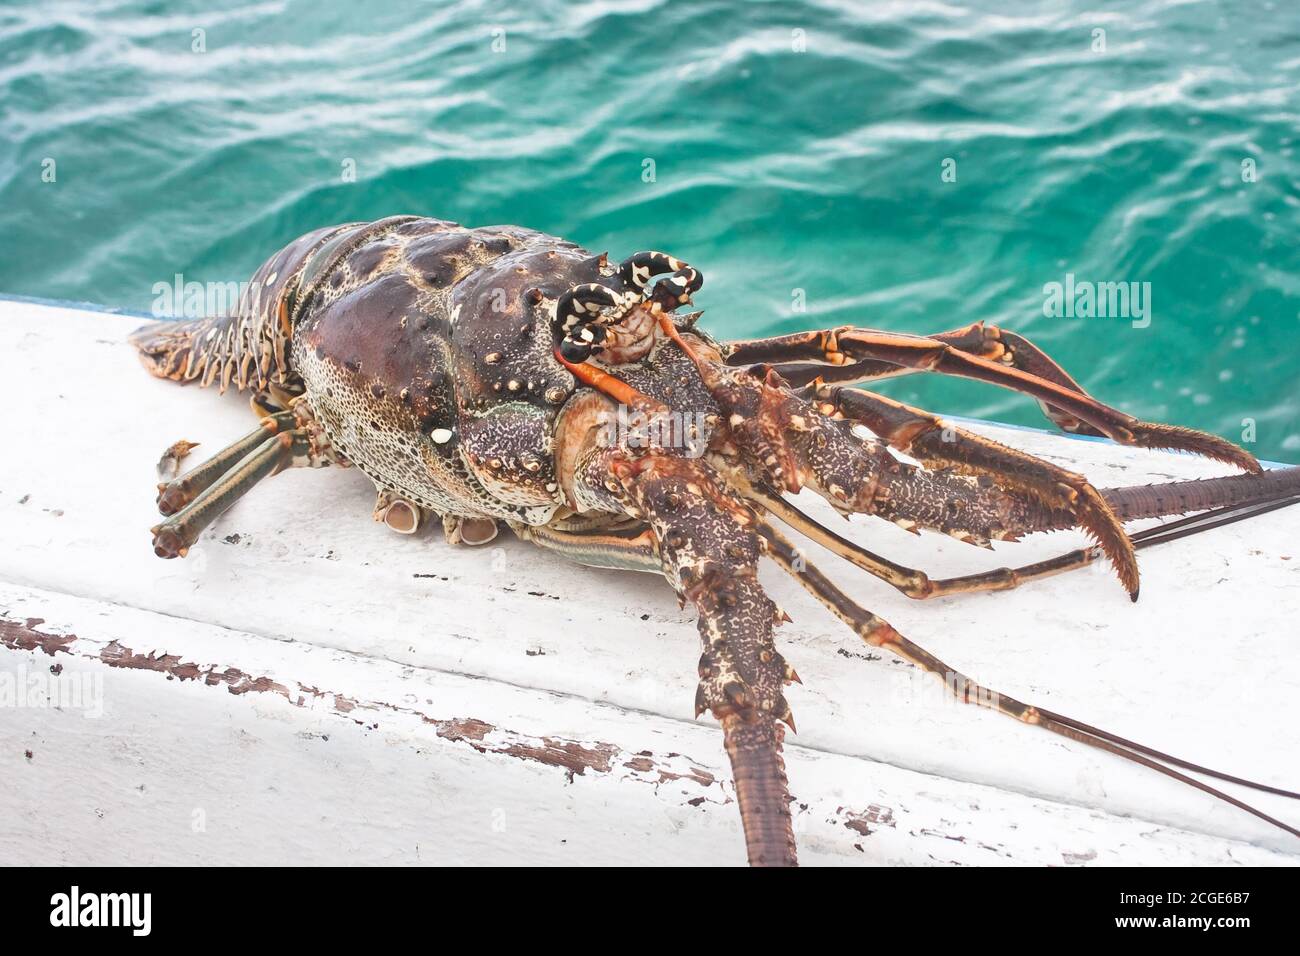 Lobster caught in the sea. Cuba Stock Photo